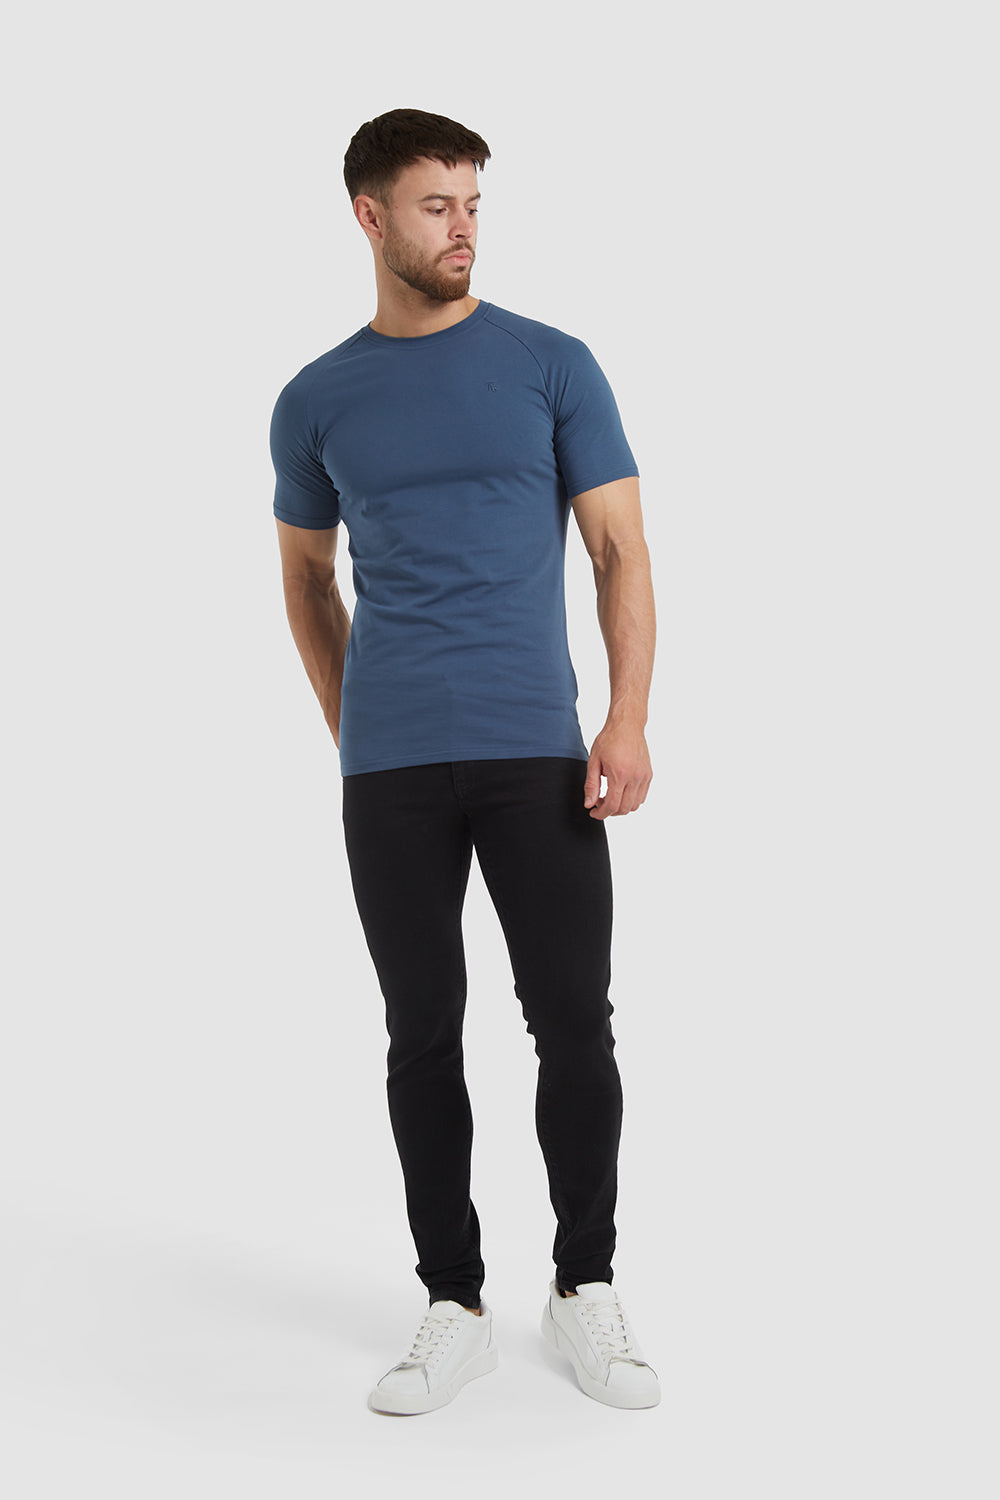 Muscle Fit T-Shirt in Oil - TAILORED ATHLETE - ROW